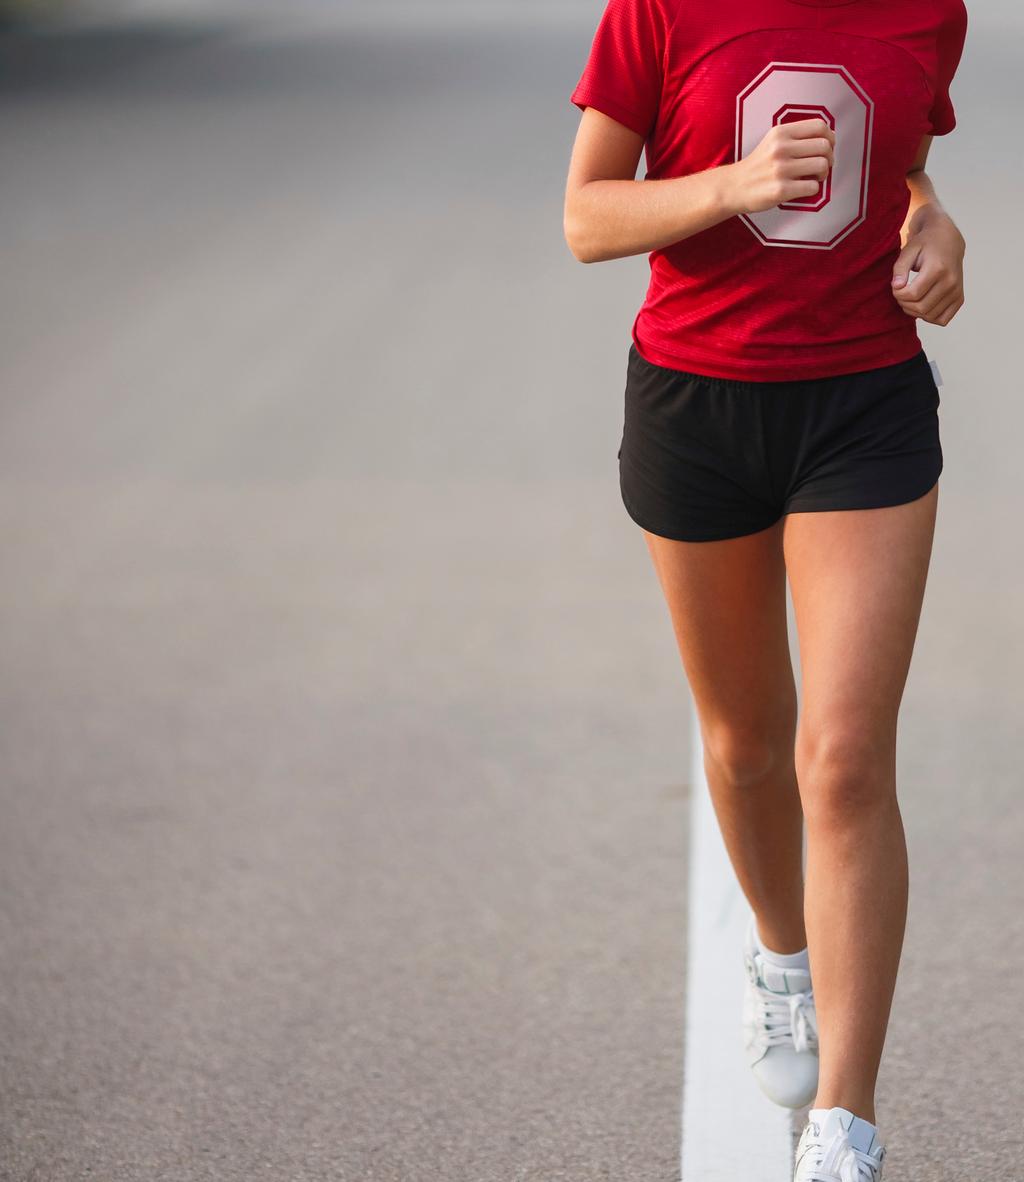 Start Running! Running improves your physical, emotional and mental health perhaps that s why its the most popular fitness activity around the world.